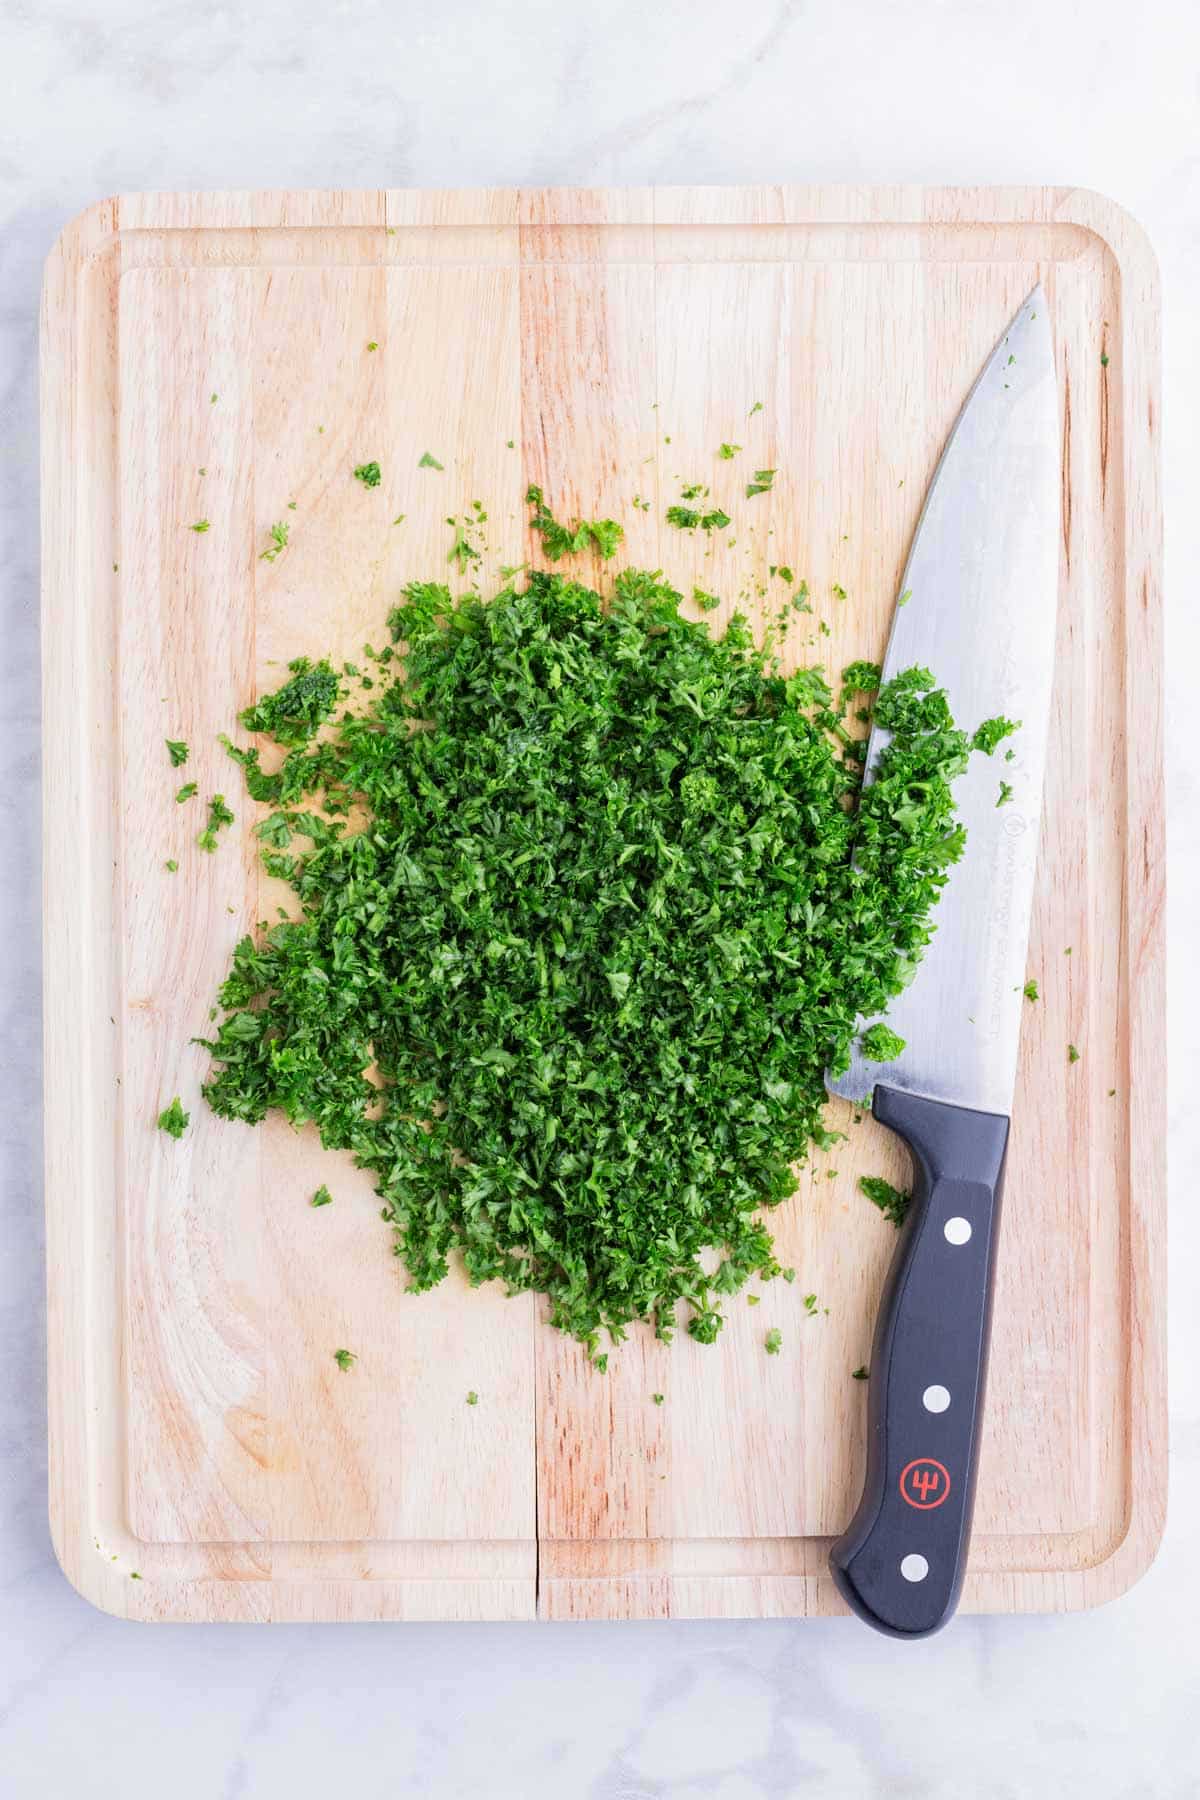 Parsley is chopped into small pieces.